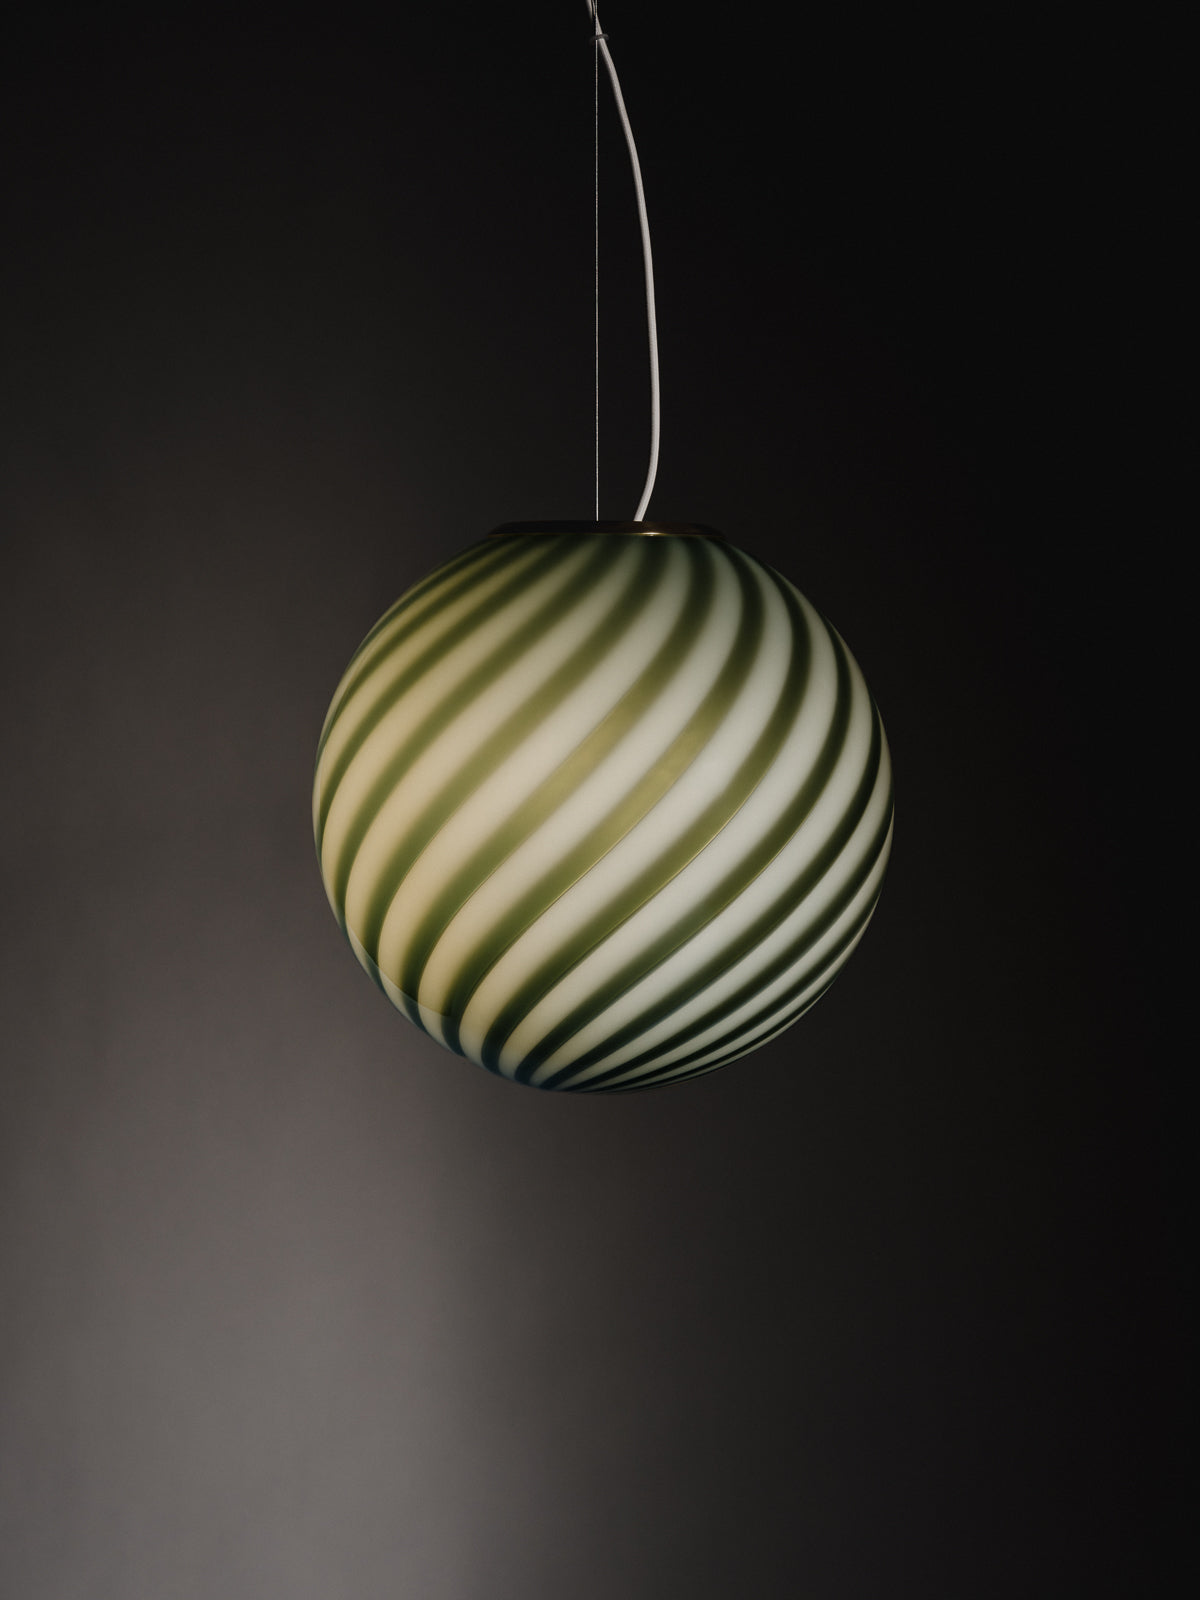 limited edition Murano Vetri glass pendant sculptural sphere-shaped pendant crafted from mouth-blown swirl opaline glass in  Petrolio: a deep and rich shade of green. Brass fitting hardware suspension. Murano pendel lampe I grøn glas med swirl. Copenhagen Venice 